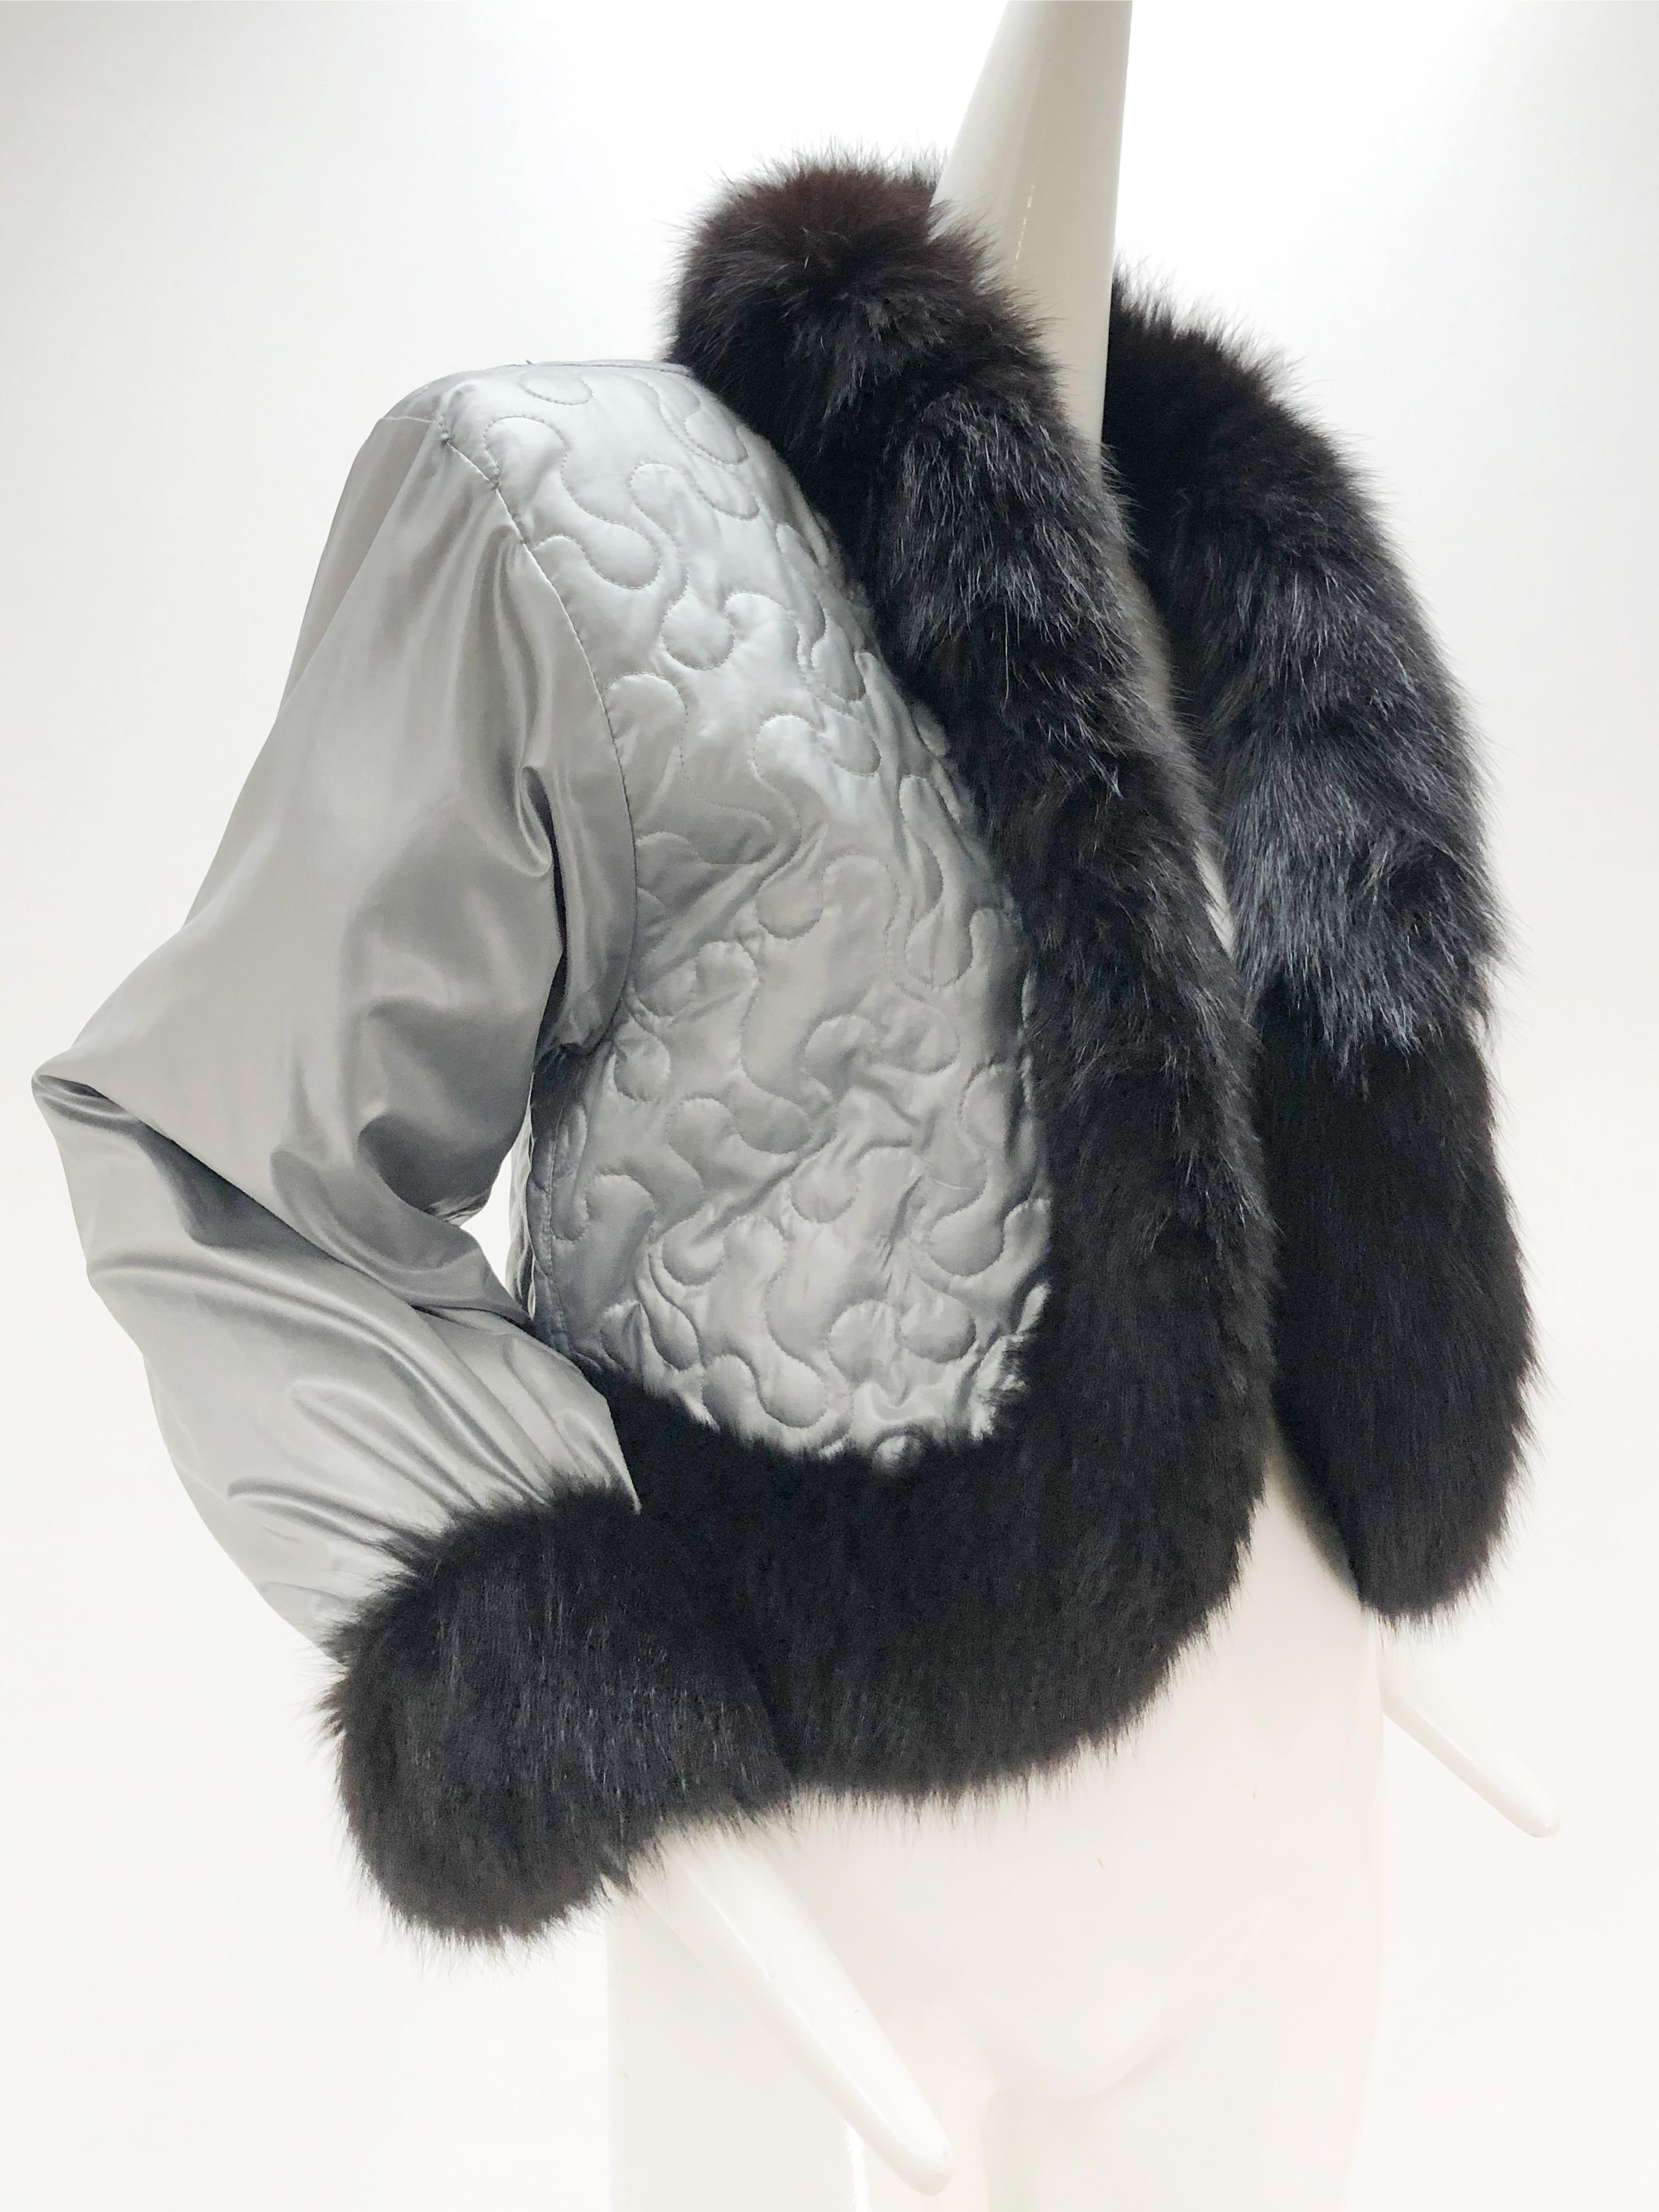 A wonderful 1980s Yves Saint Laurent quilted silver nylon cropped coat with black fox fur trim everywhere! This piece follows his Russian themed collections and is quilted in a passimenterie style and cropped short. No front closure. Fits